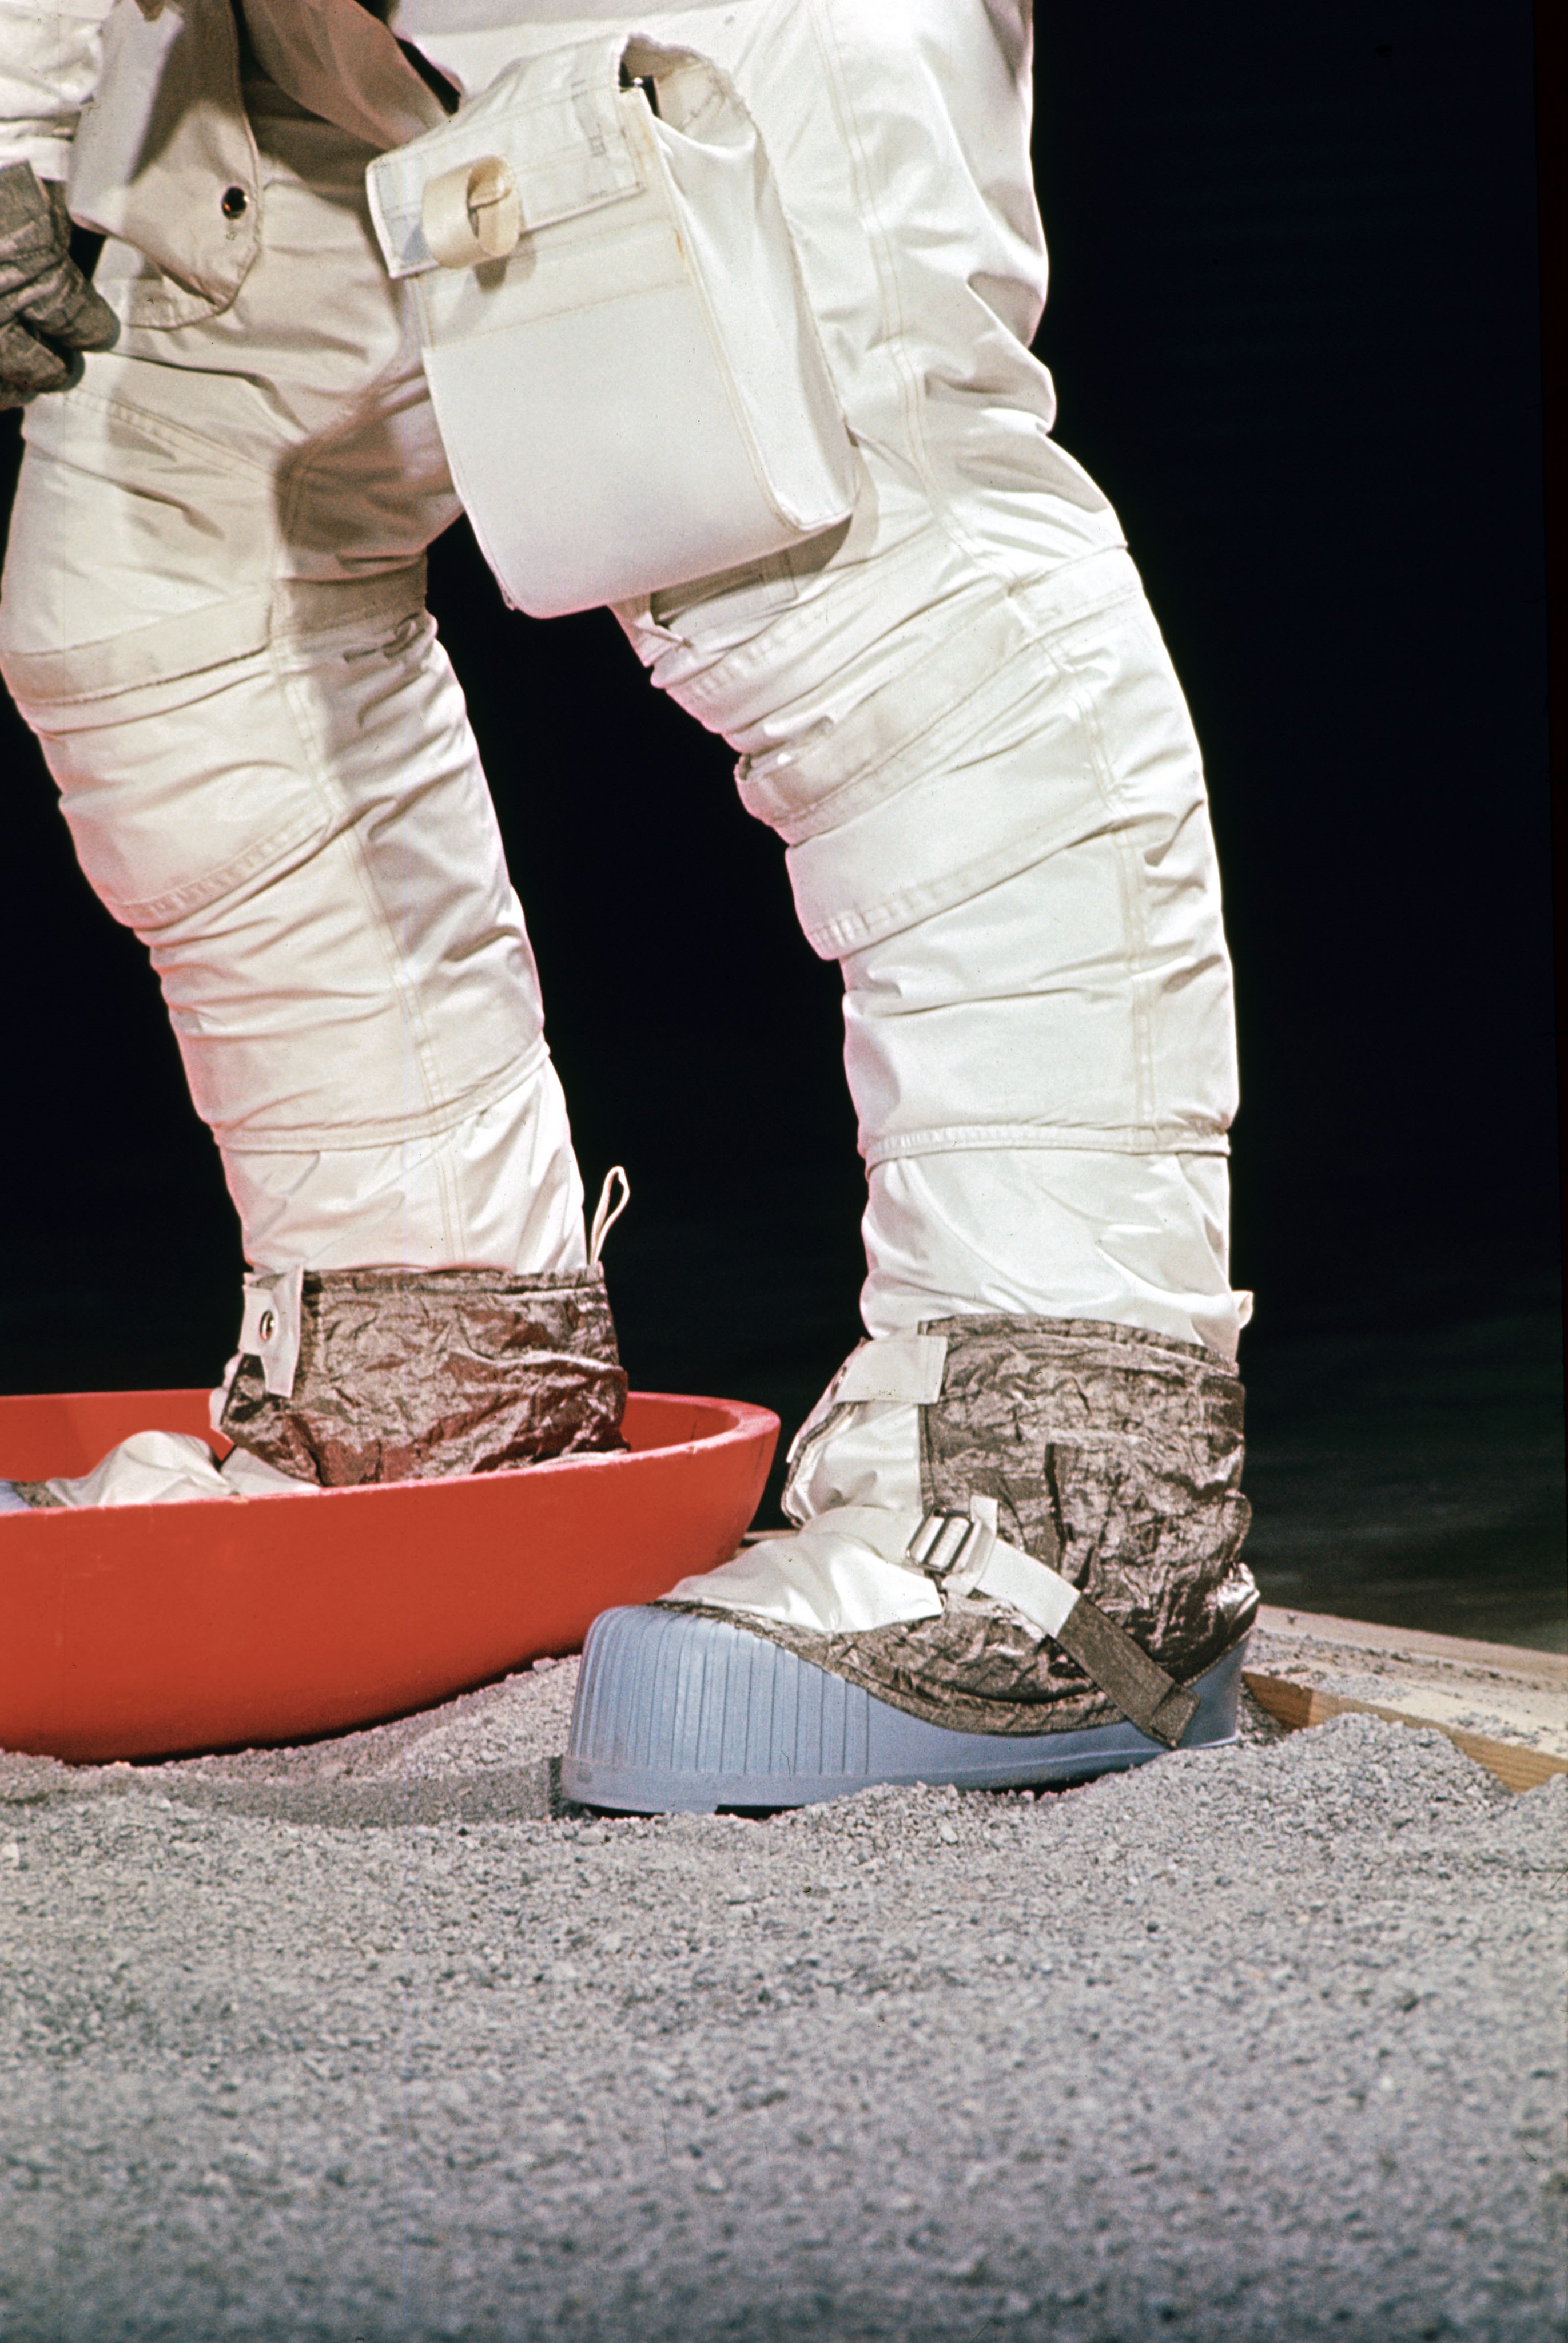 Apollo 11 astronaut Neil A. Armstrong practices taking the first step onto the lunar surface